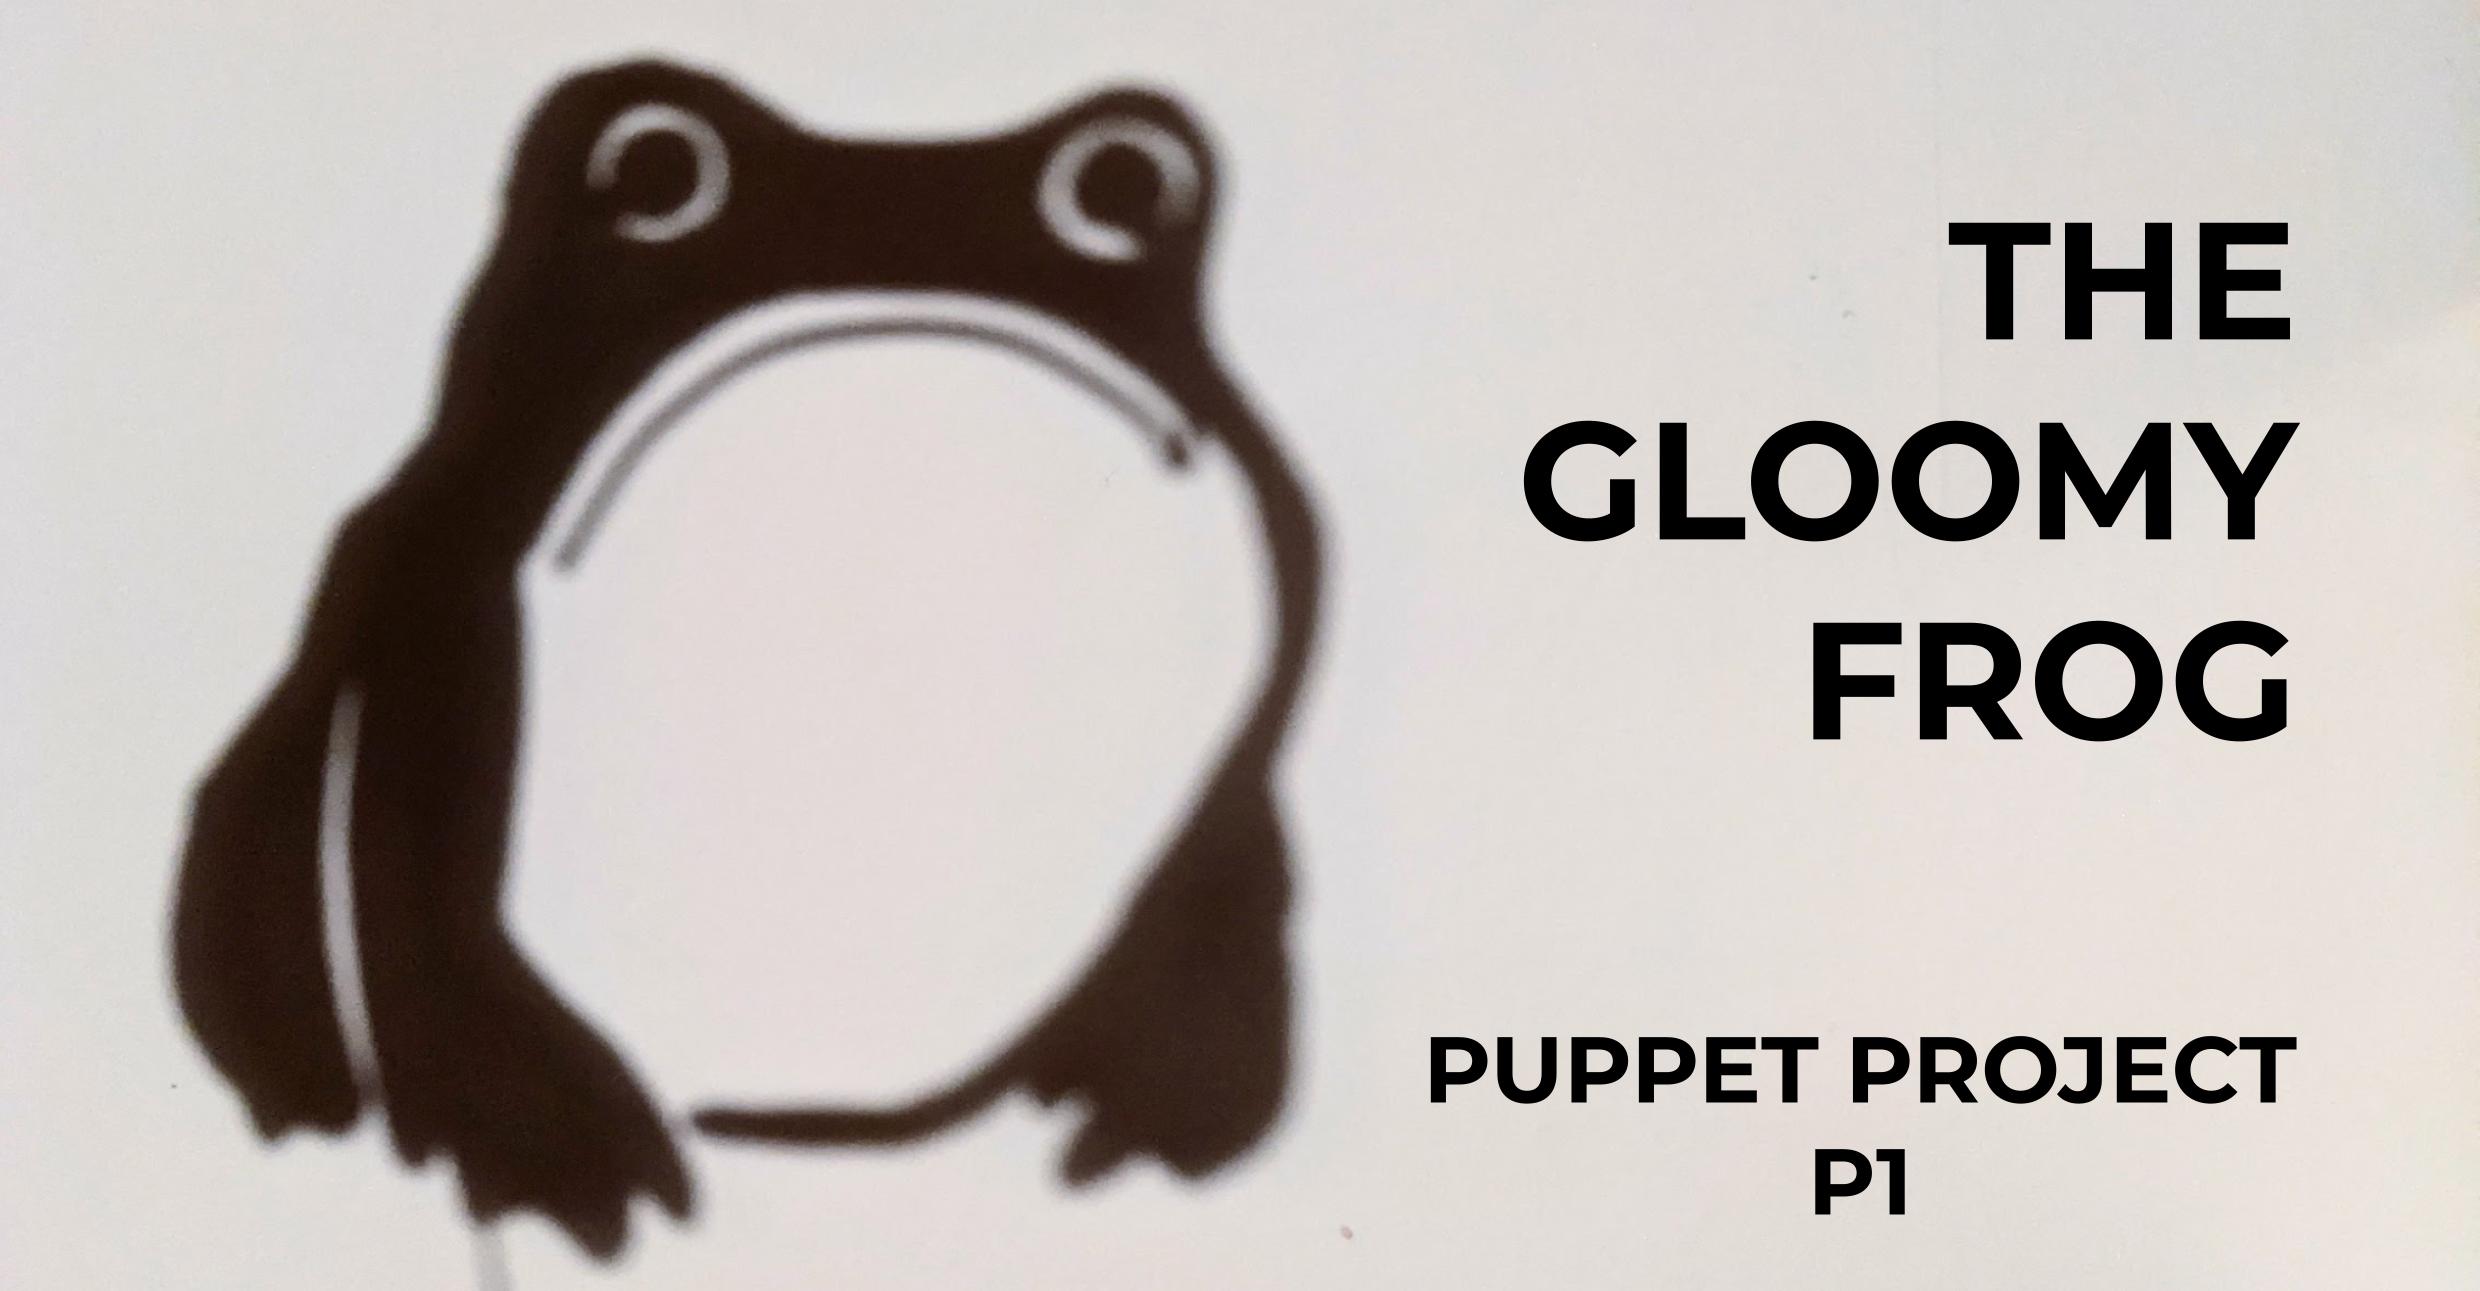 Shadow Puppet of Frog by Matsumoto Hoji